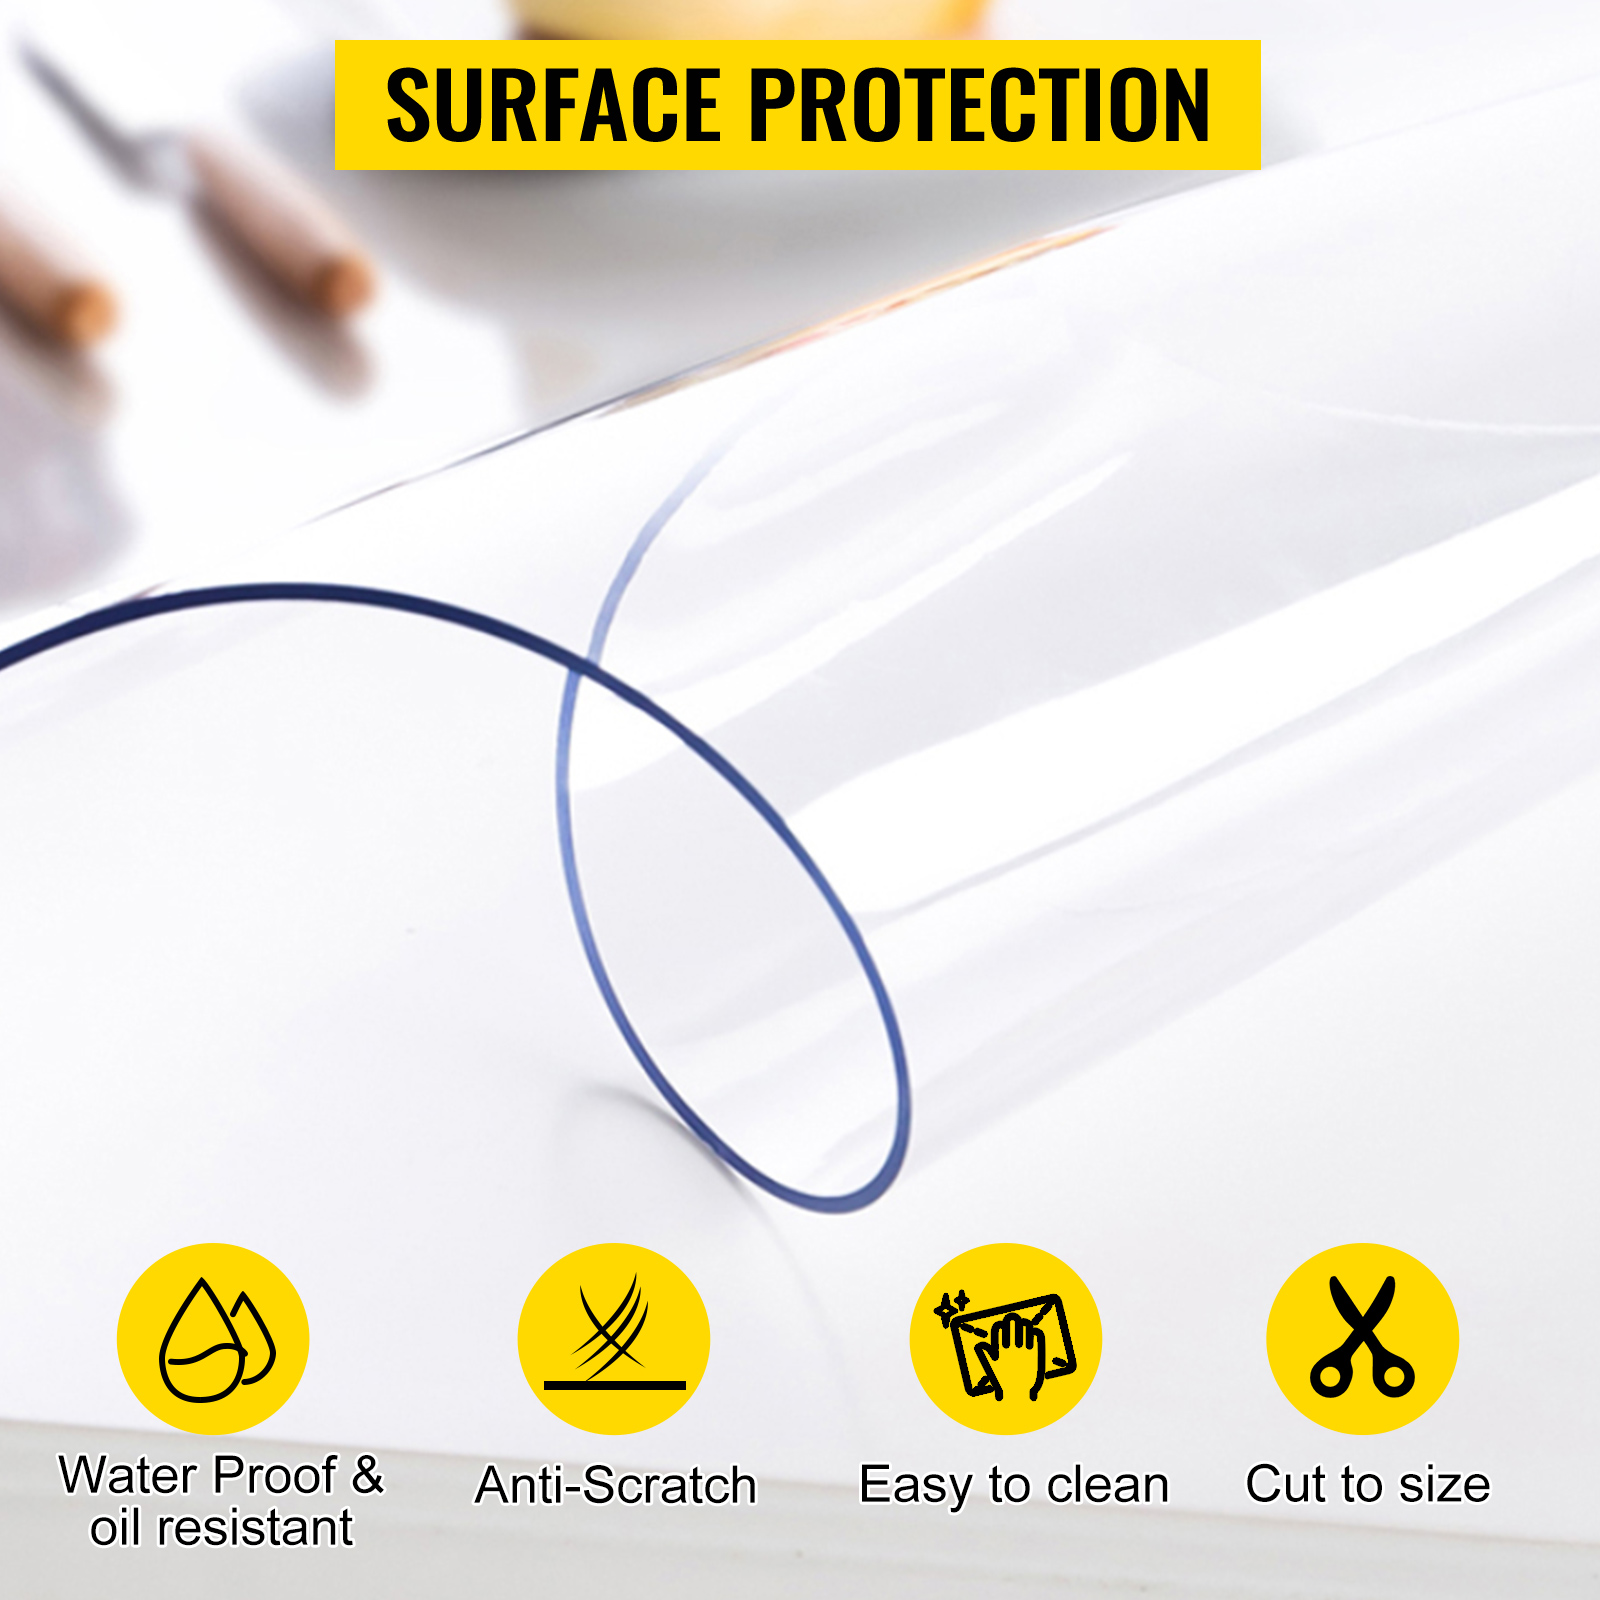 Rectangle 42 x 60 Inch Clear PVC Table Cover Protector Desk Vinyl Thickness  1.5mm Waterproof Plastic Tablecloth Anti-hot Transparent Table Pad (42 x